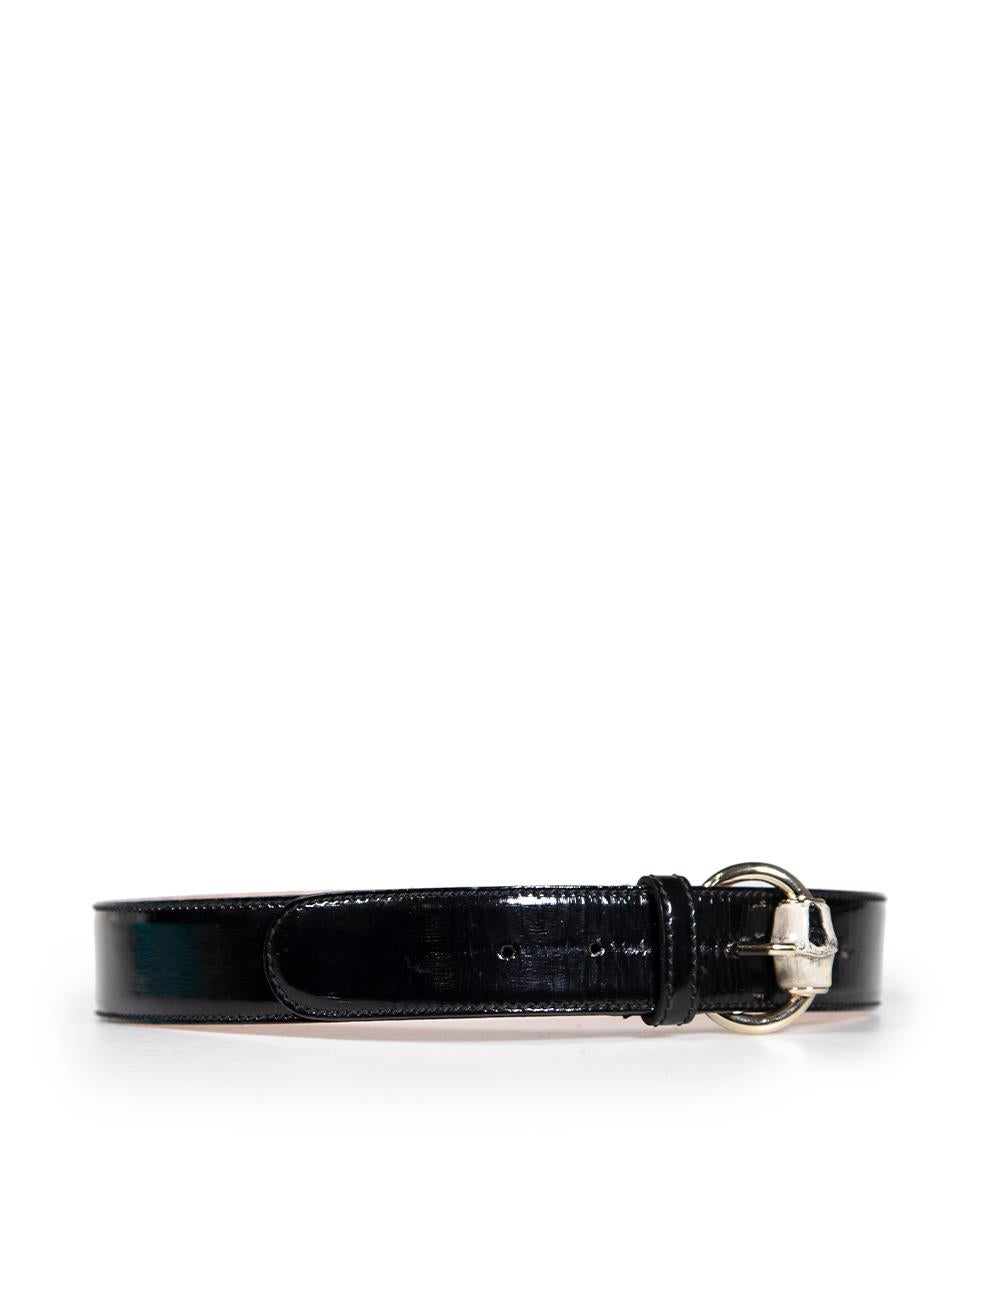 CONDITION is Good. General wear to belt is evident. Moderate signs of wear to the exterior and bamboo buckle with abrasions and scratches to the leather. There are also marks to the underside on this used Gucci designer resale item.
 
 
 
 Details
